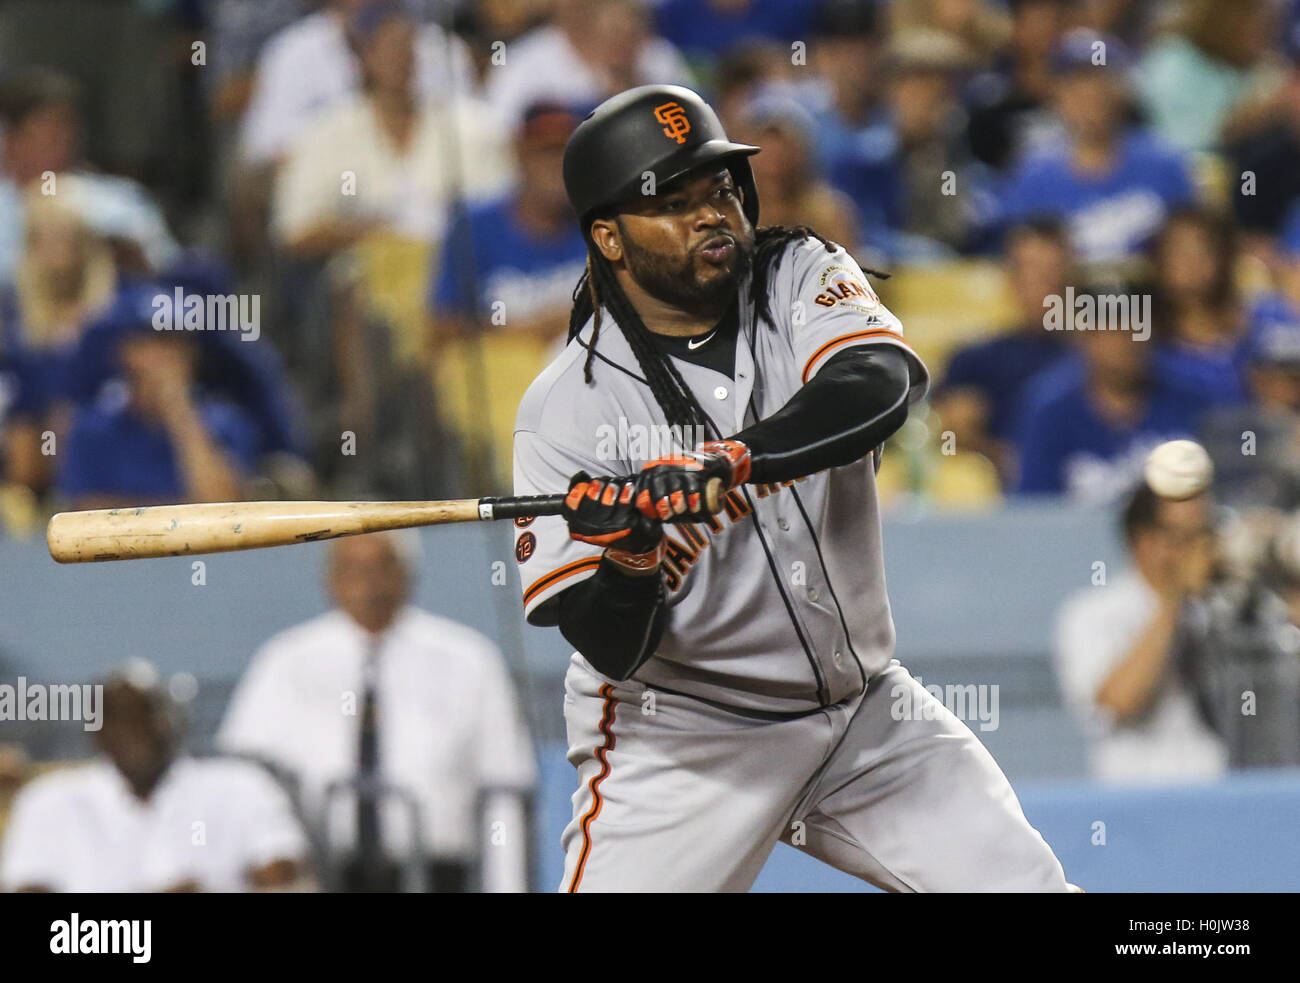 Los Angeles, California, USA. 20th Sep, 2016. San Francisco Giants catcher Johnny Cueto hits the ball against Los Angeles Dodgers during a baseball game on Tuesday, Sept. 20, 2016, in Los Angeles. © Ringo Chiu/ZUMA Wire/Alamy Live News Stock Photo